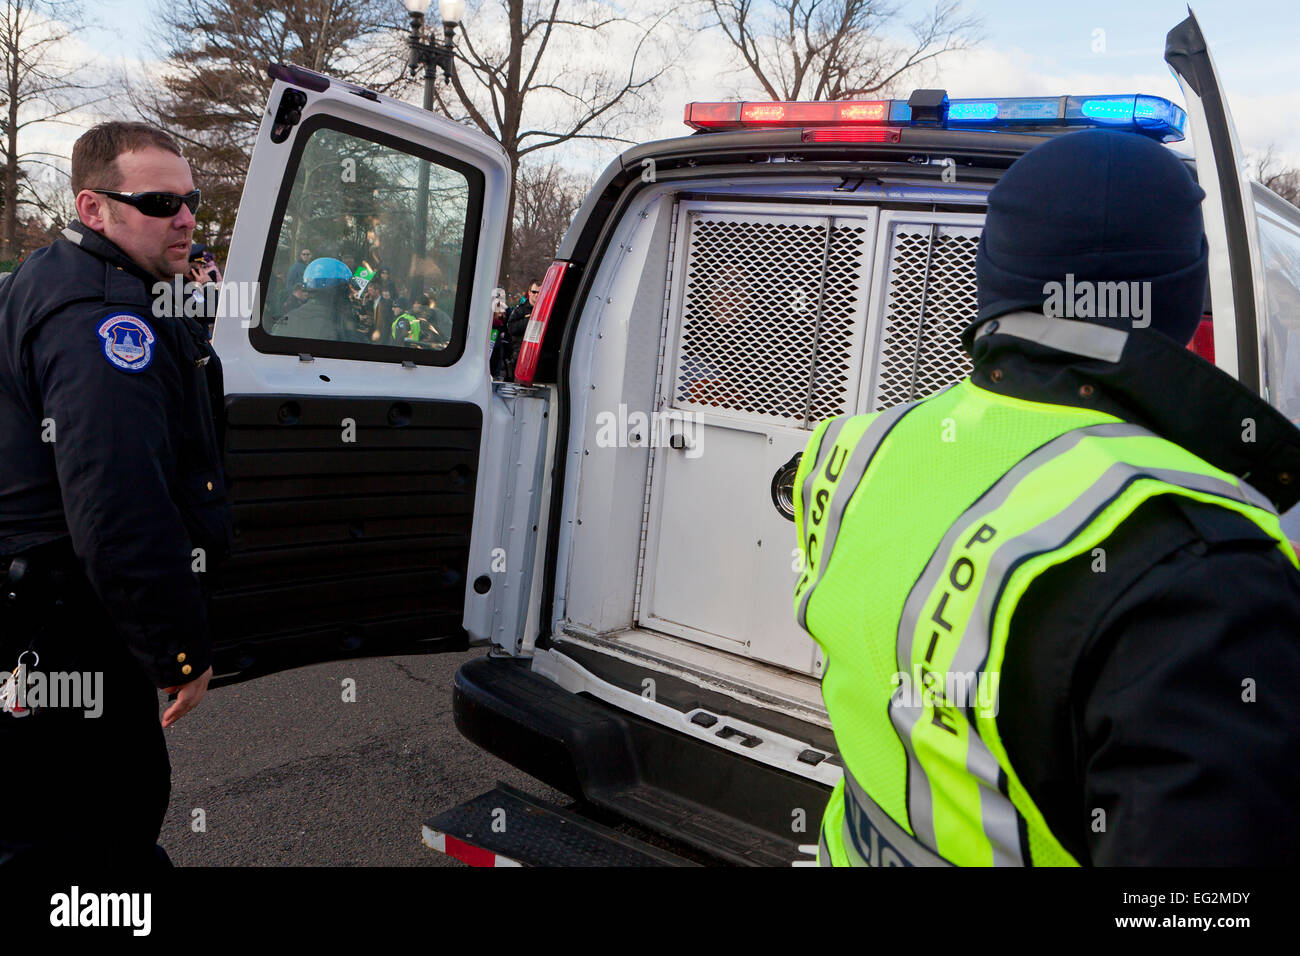 Police officers closing police van doors at a street protest event - Washington, DC USA Stock Photo